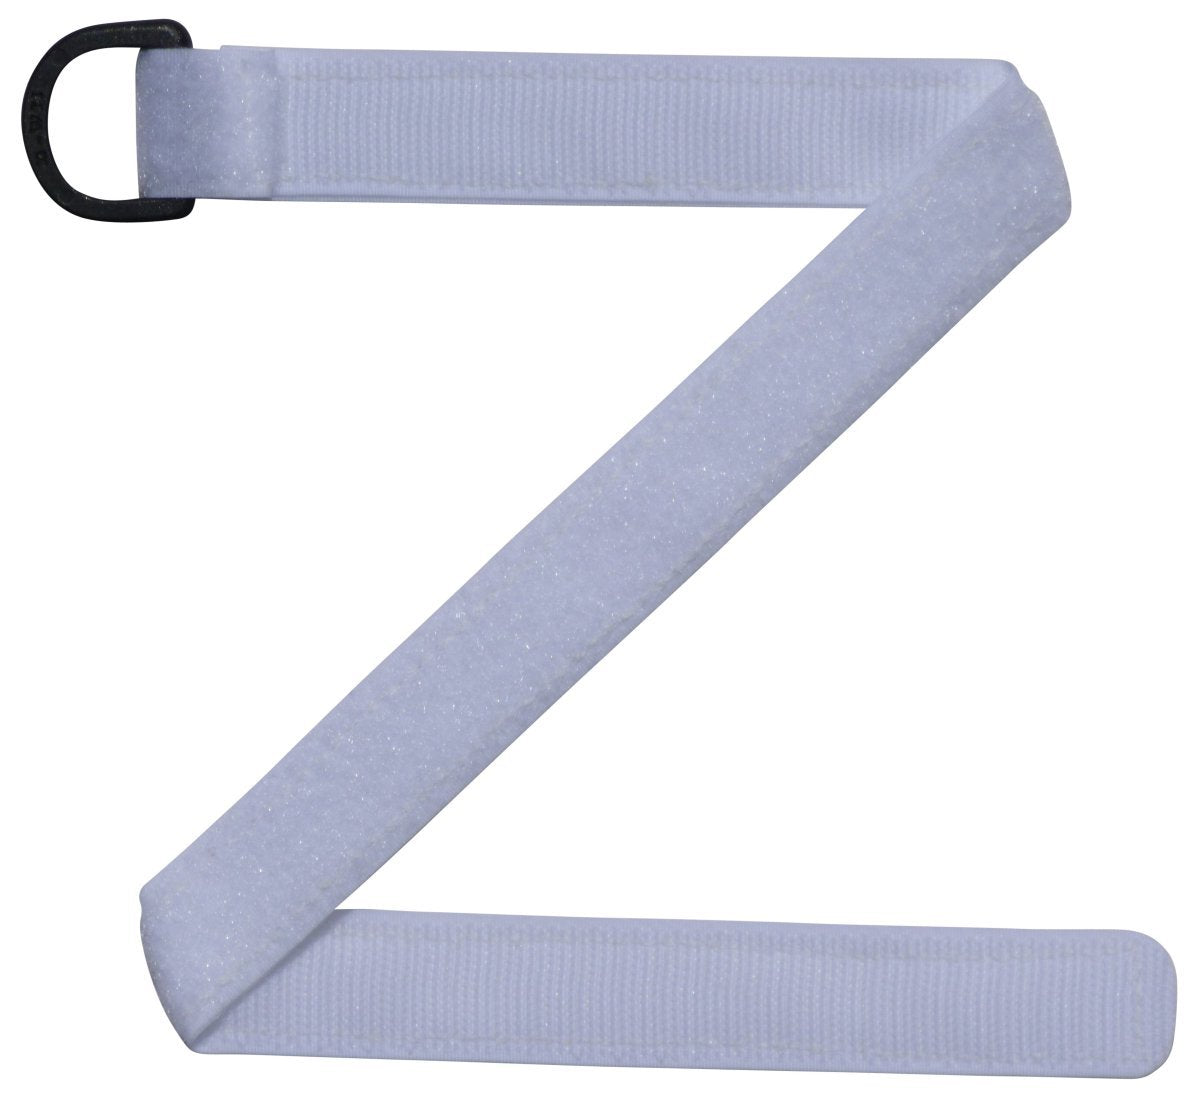 Benristraps 25mm back to back hook & loop strap in white with D ring (pair)